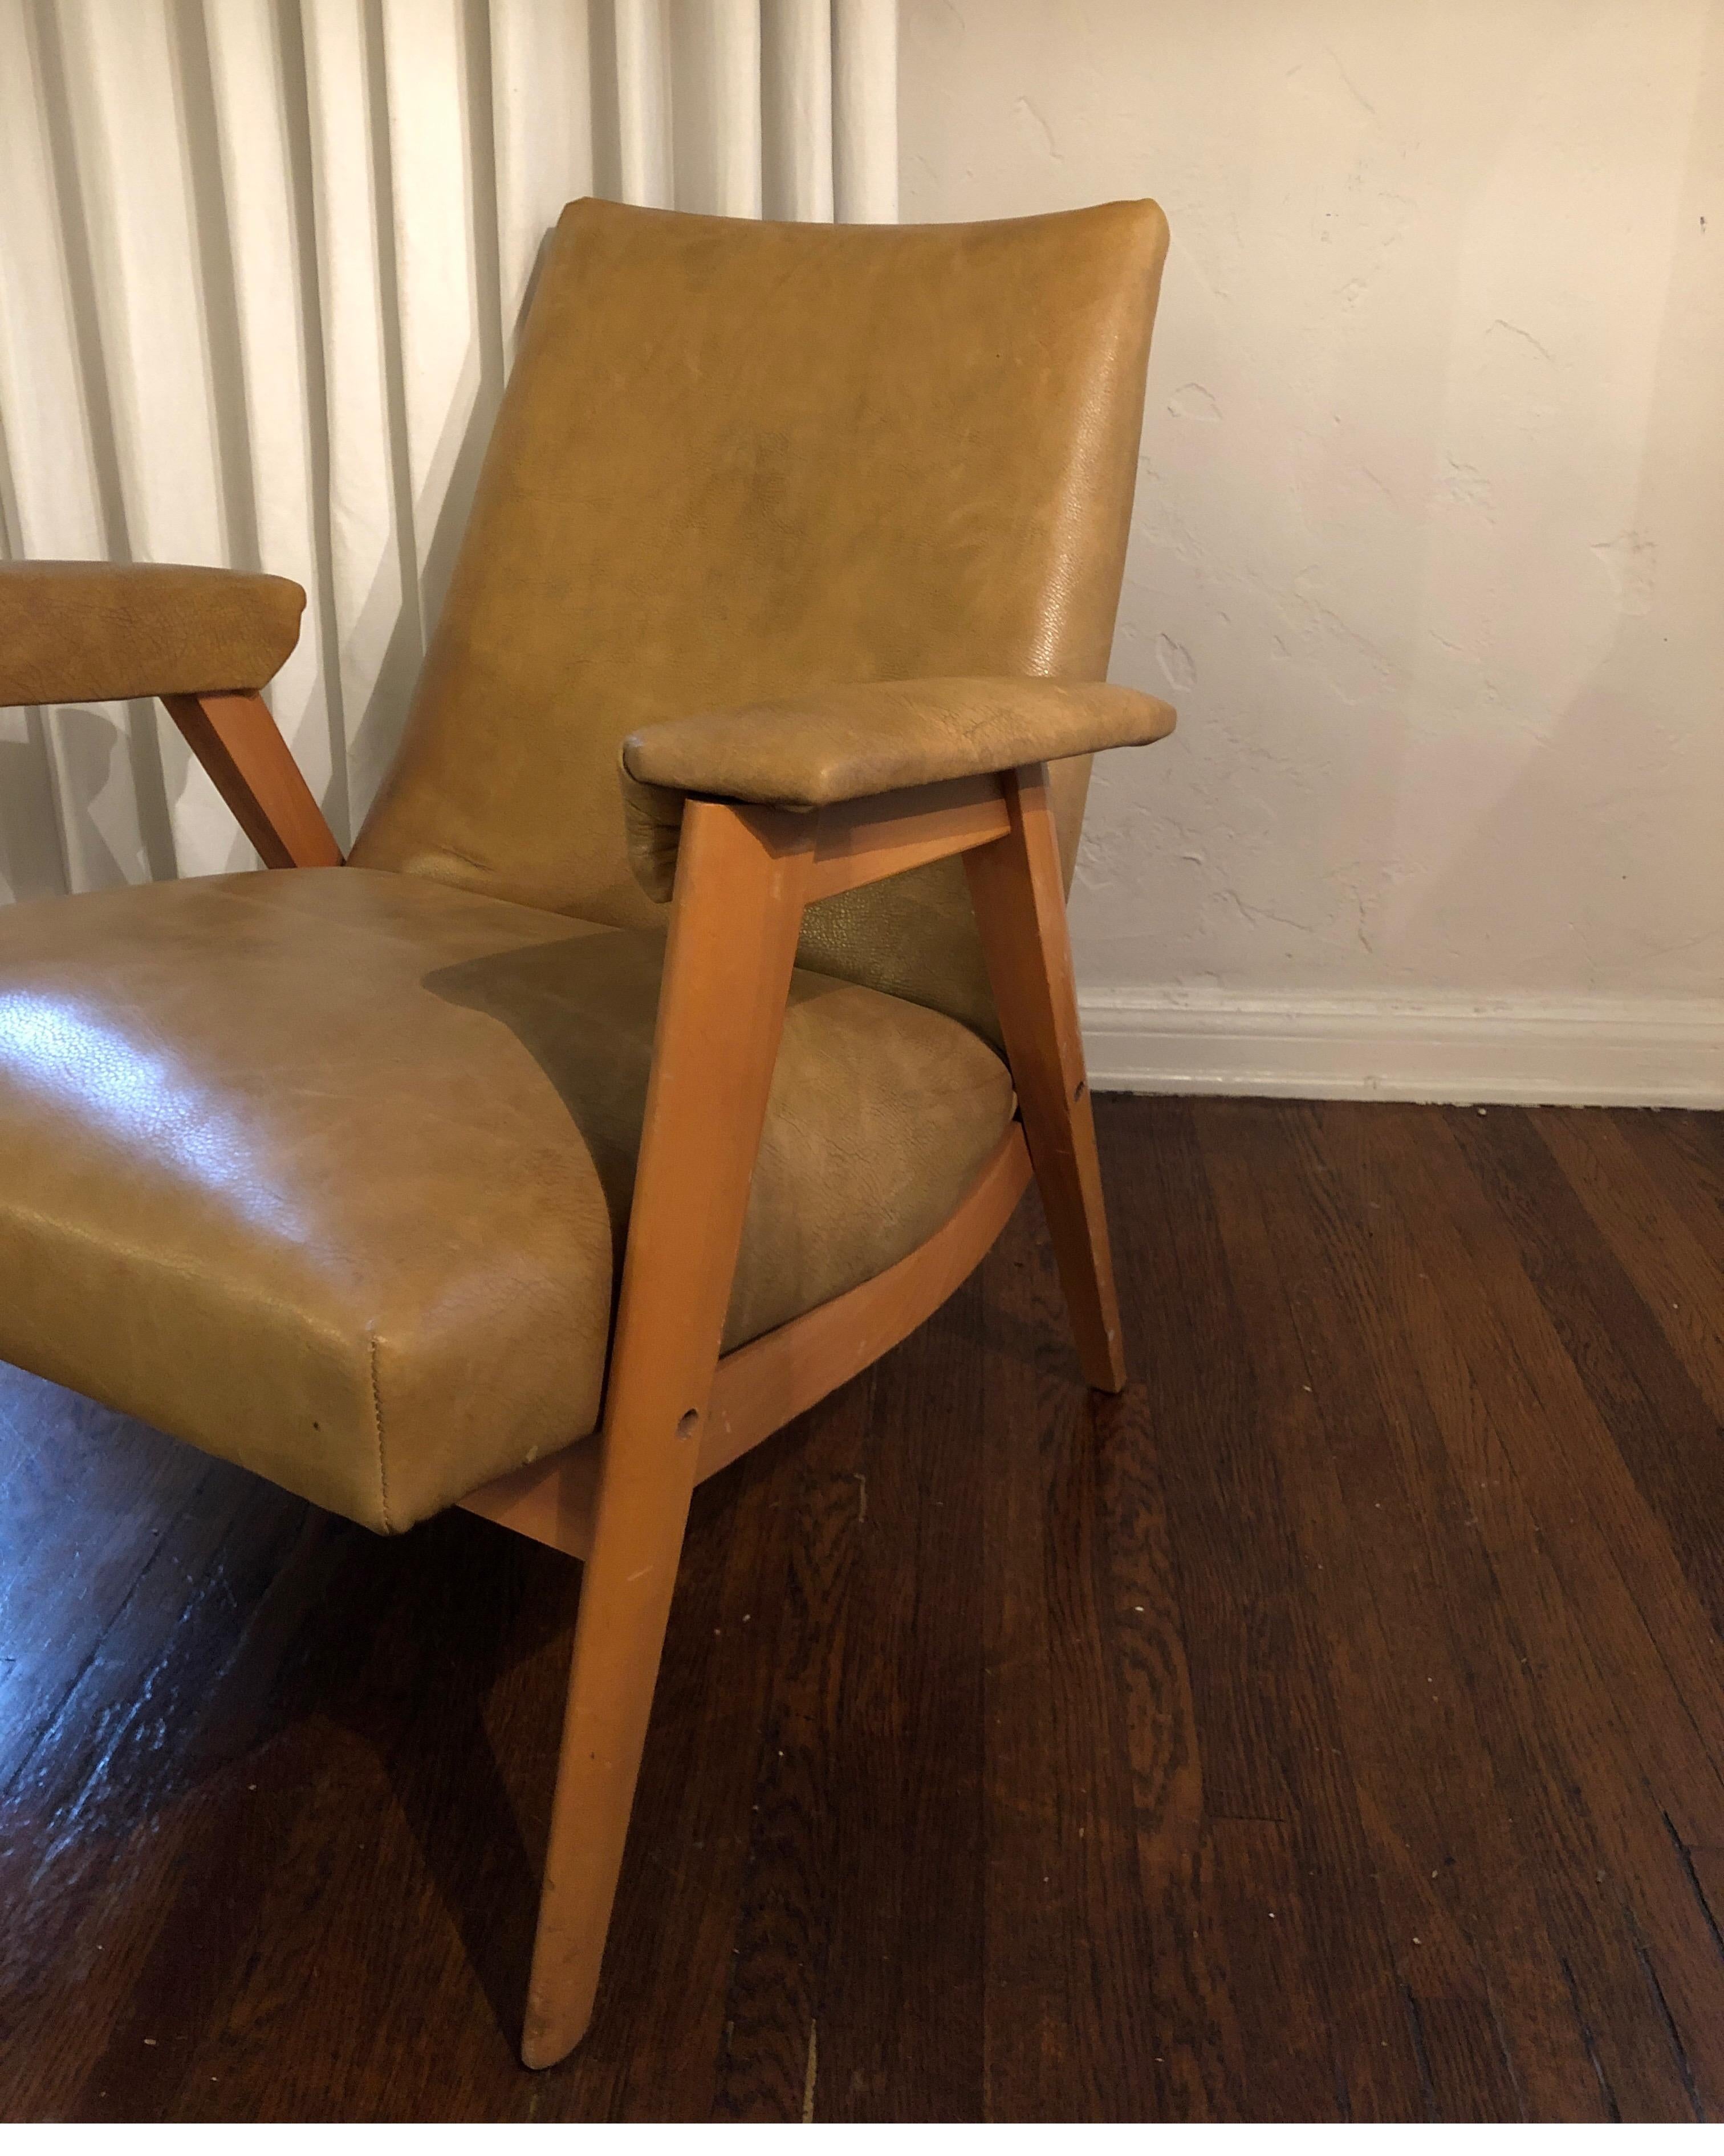 Streamlined Heywood Wakefield leather lounge chair. Curved wood frame upholstered in camel colored leather.
Authentic Mid-Century Modern with stamp. 

Measures: 30